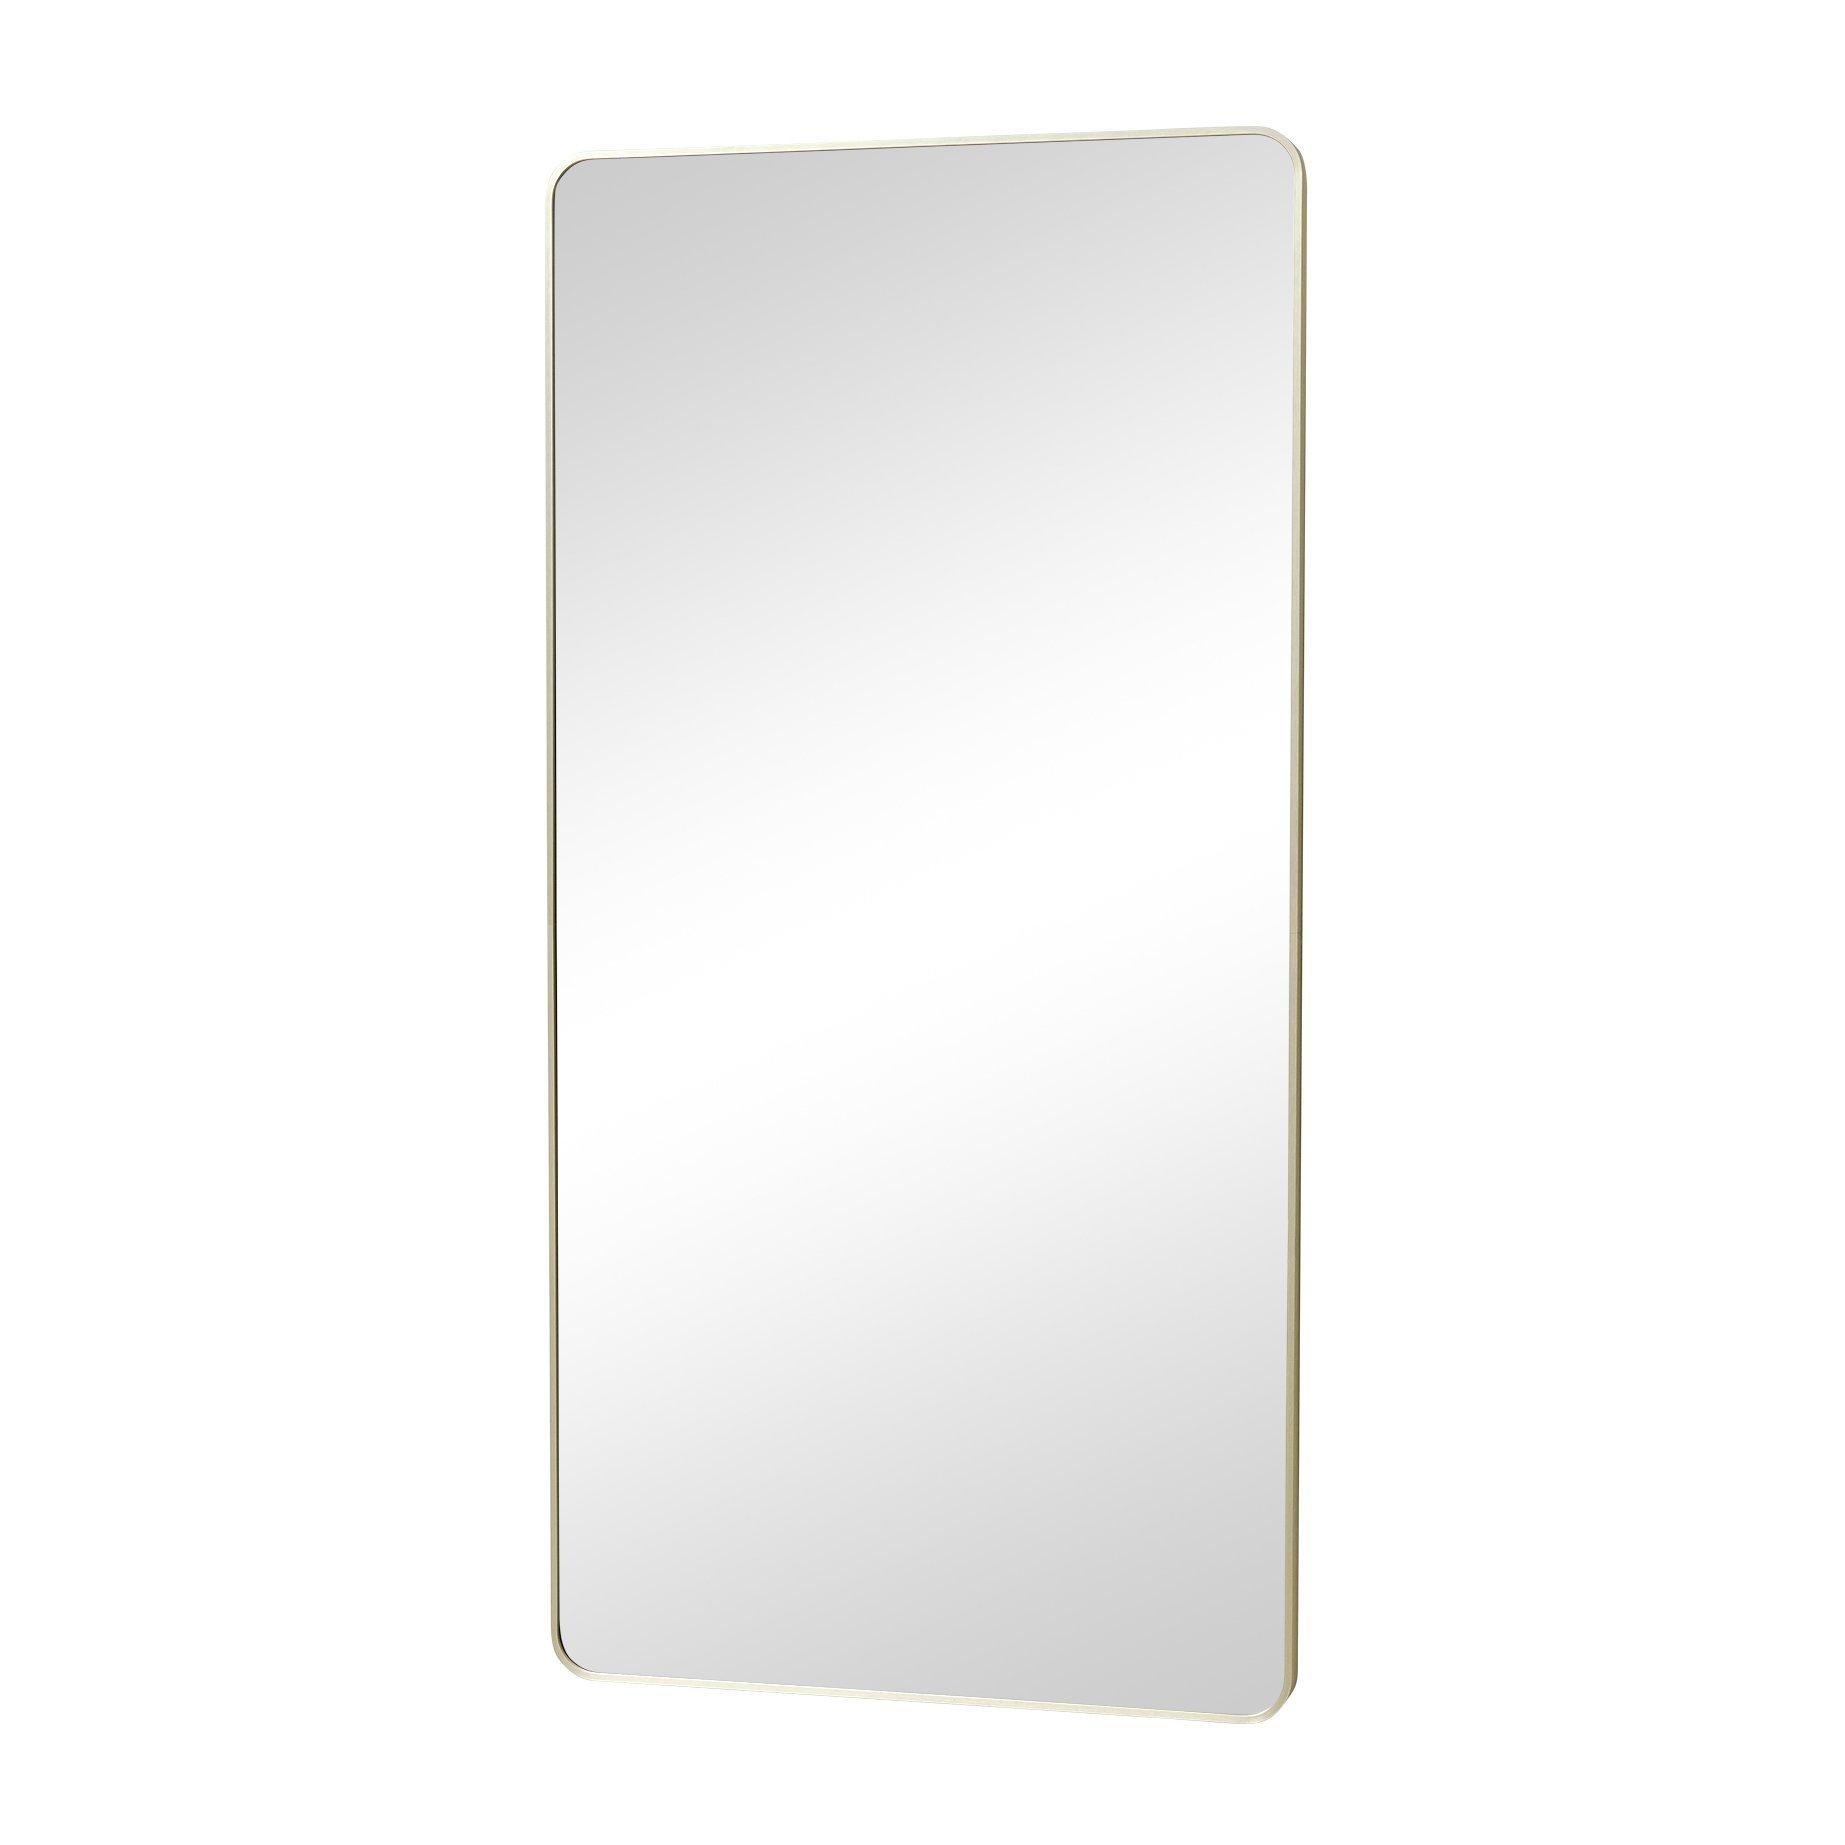 Large Gold Curved Framed Wall / Leaner Mirror 160cm X 80cm